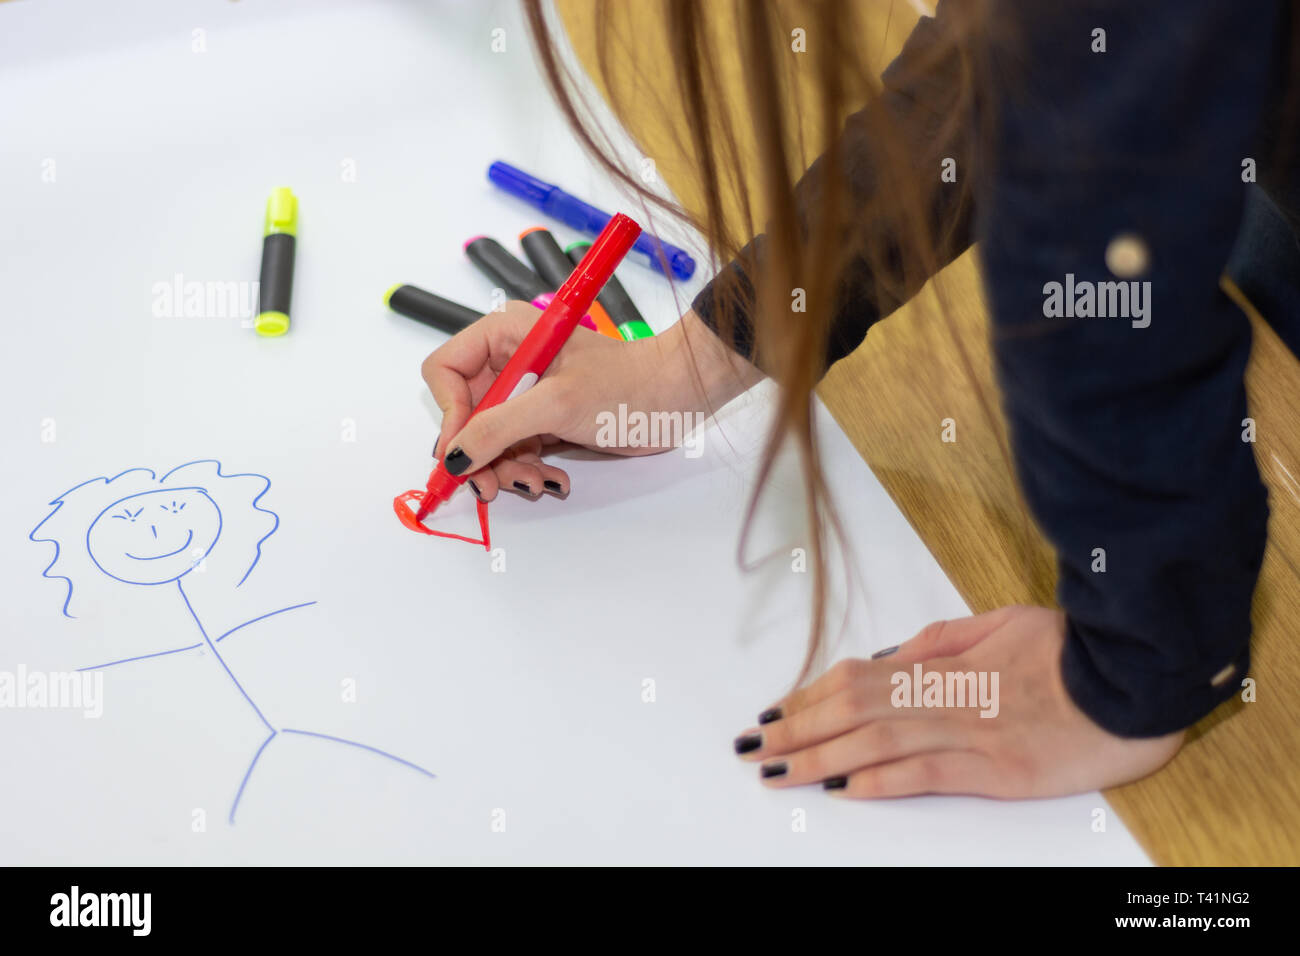 Woman hand with red felt pen drawing heart on big white paper with stickman on desk in classroom. Colorful pens spilled on paper. Education concept Stock Photo